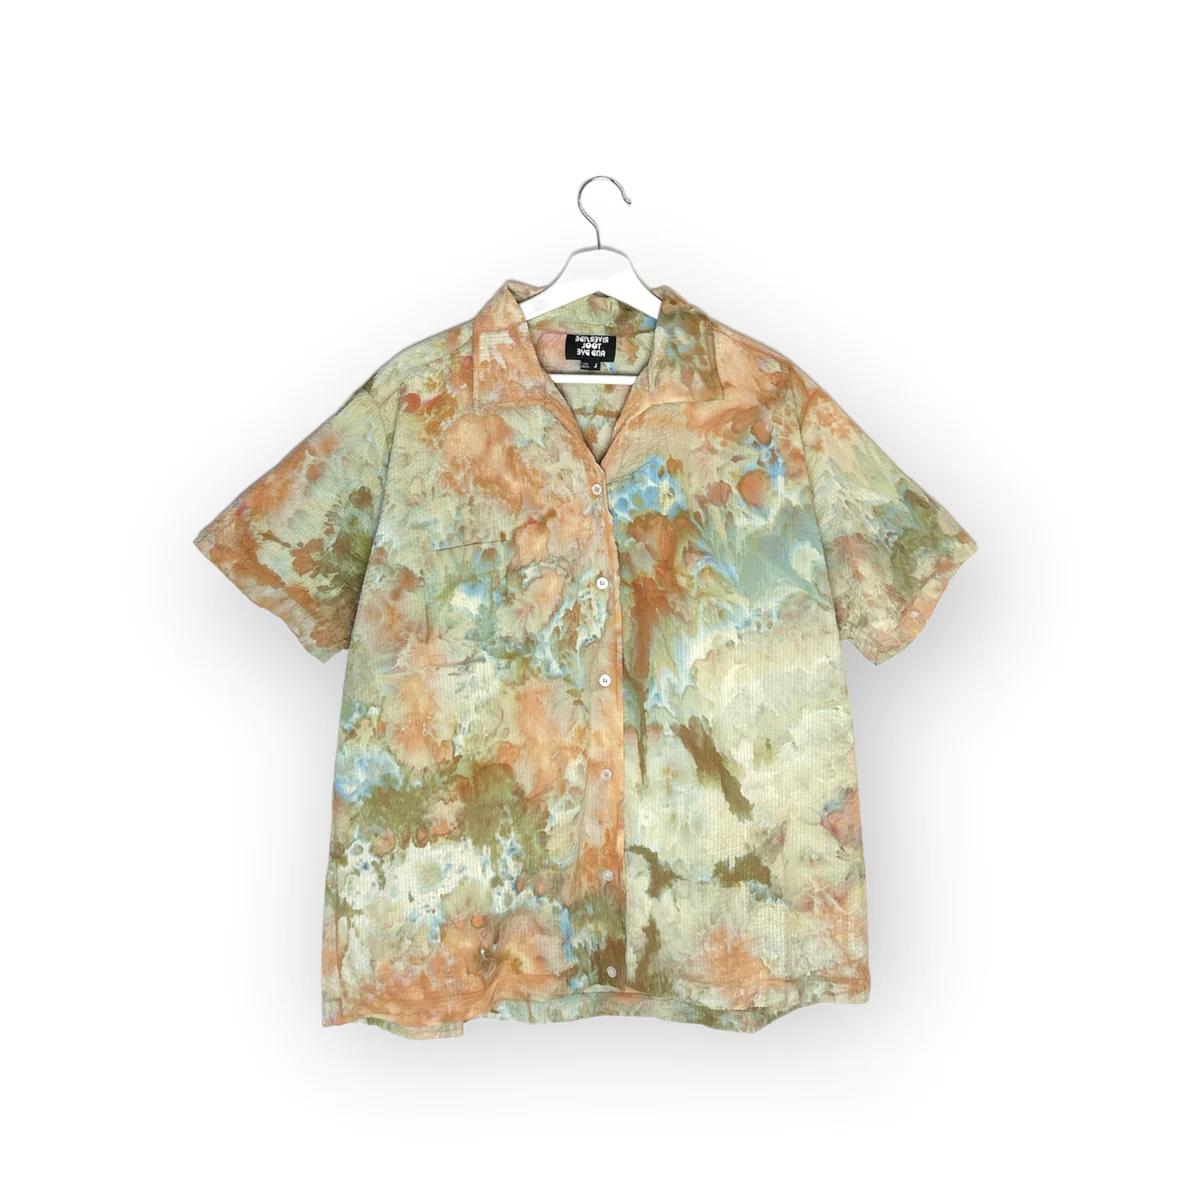 Product Image for Louie Seersucker Shirt, Ivory